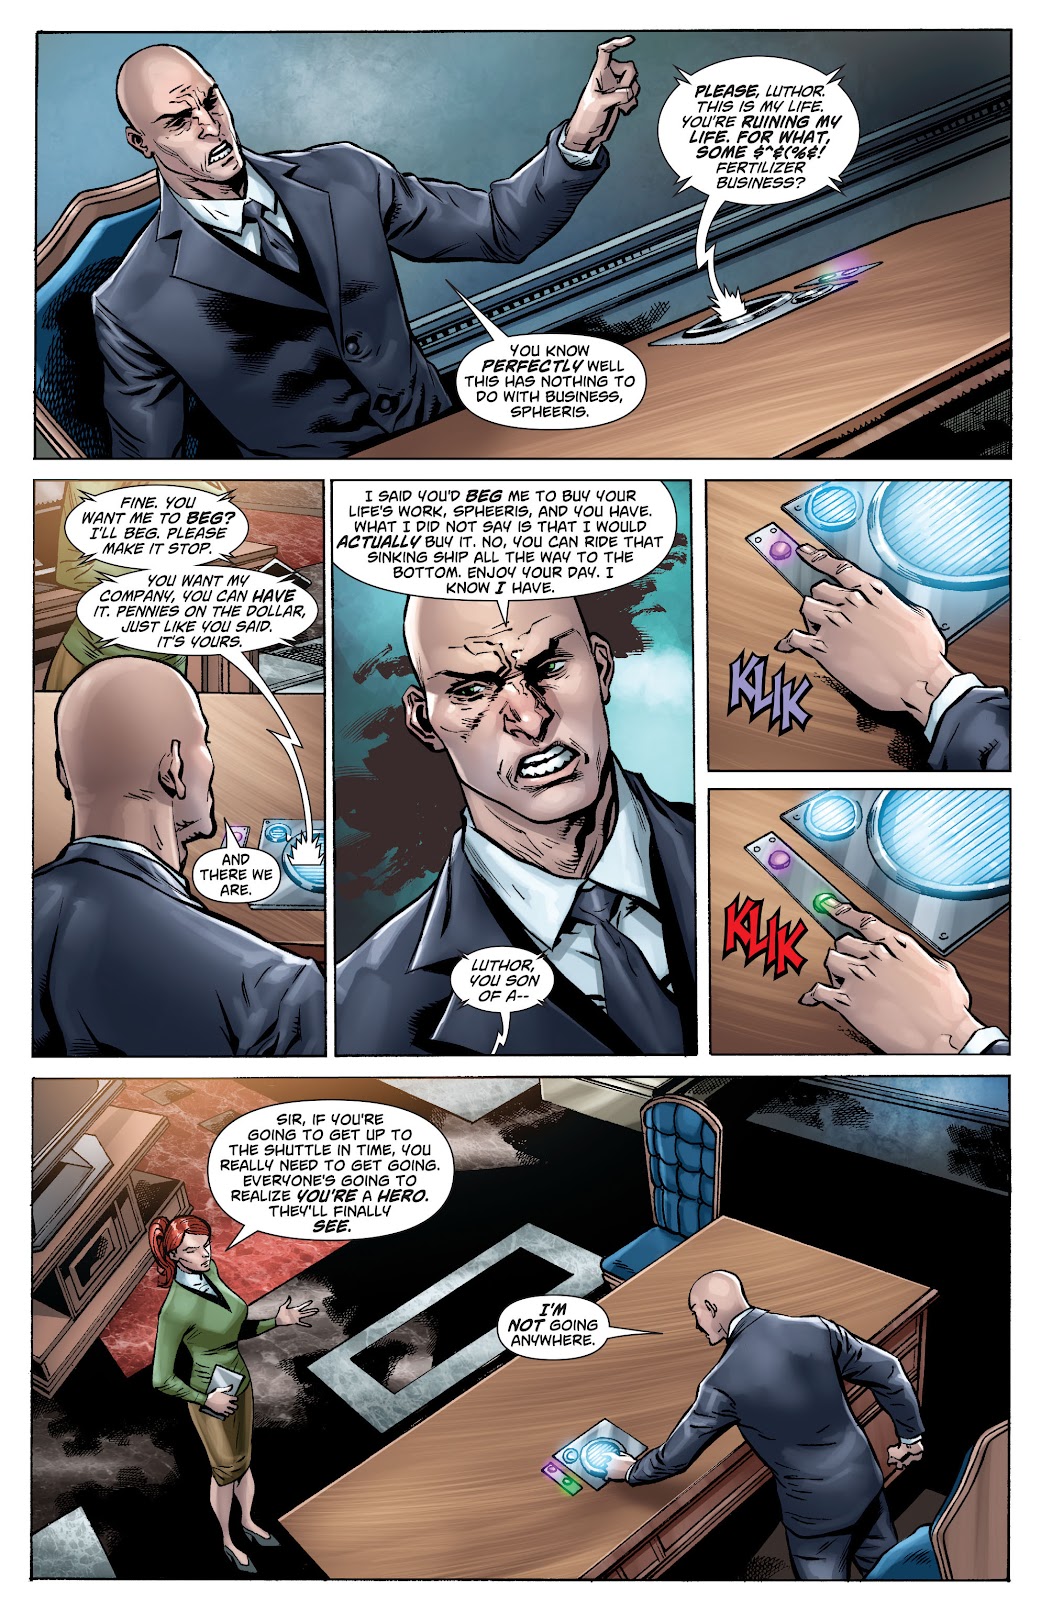 Action Comics (2011) issue 23.3 - Page 14